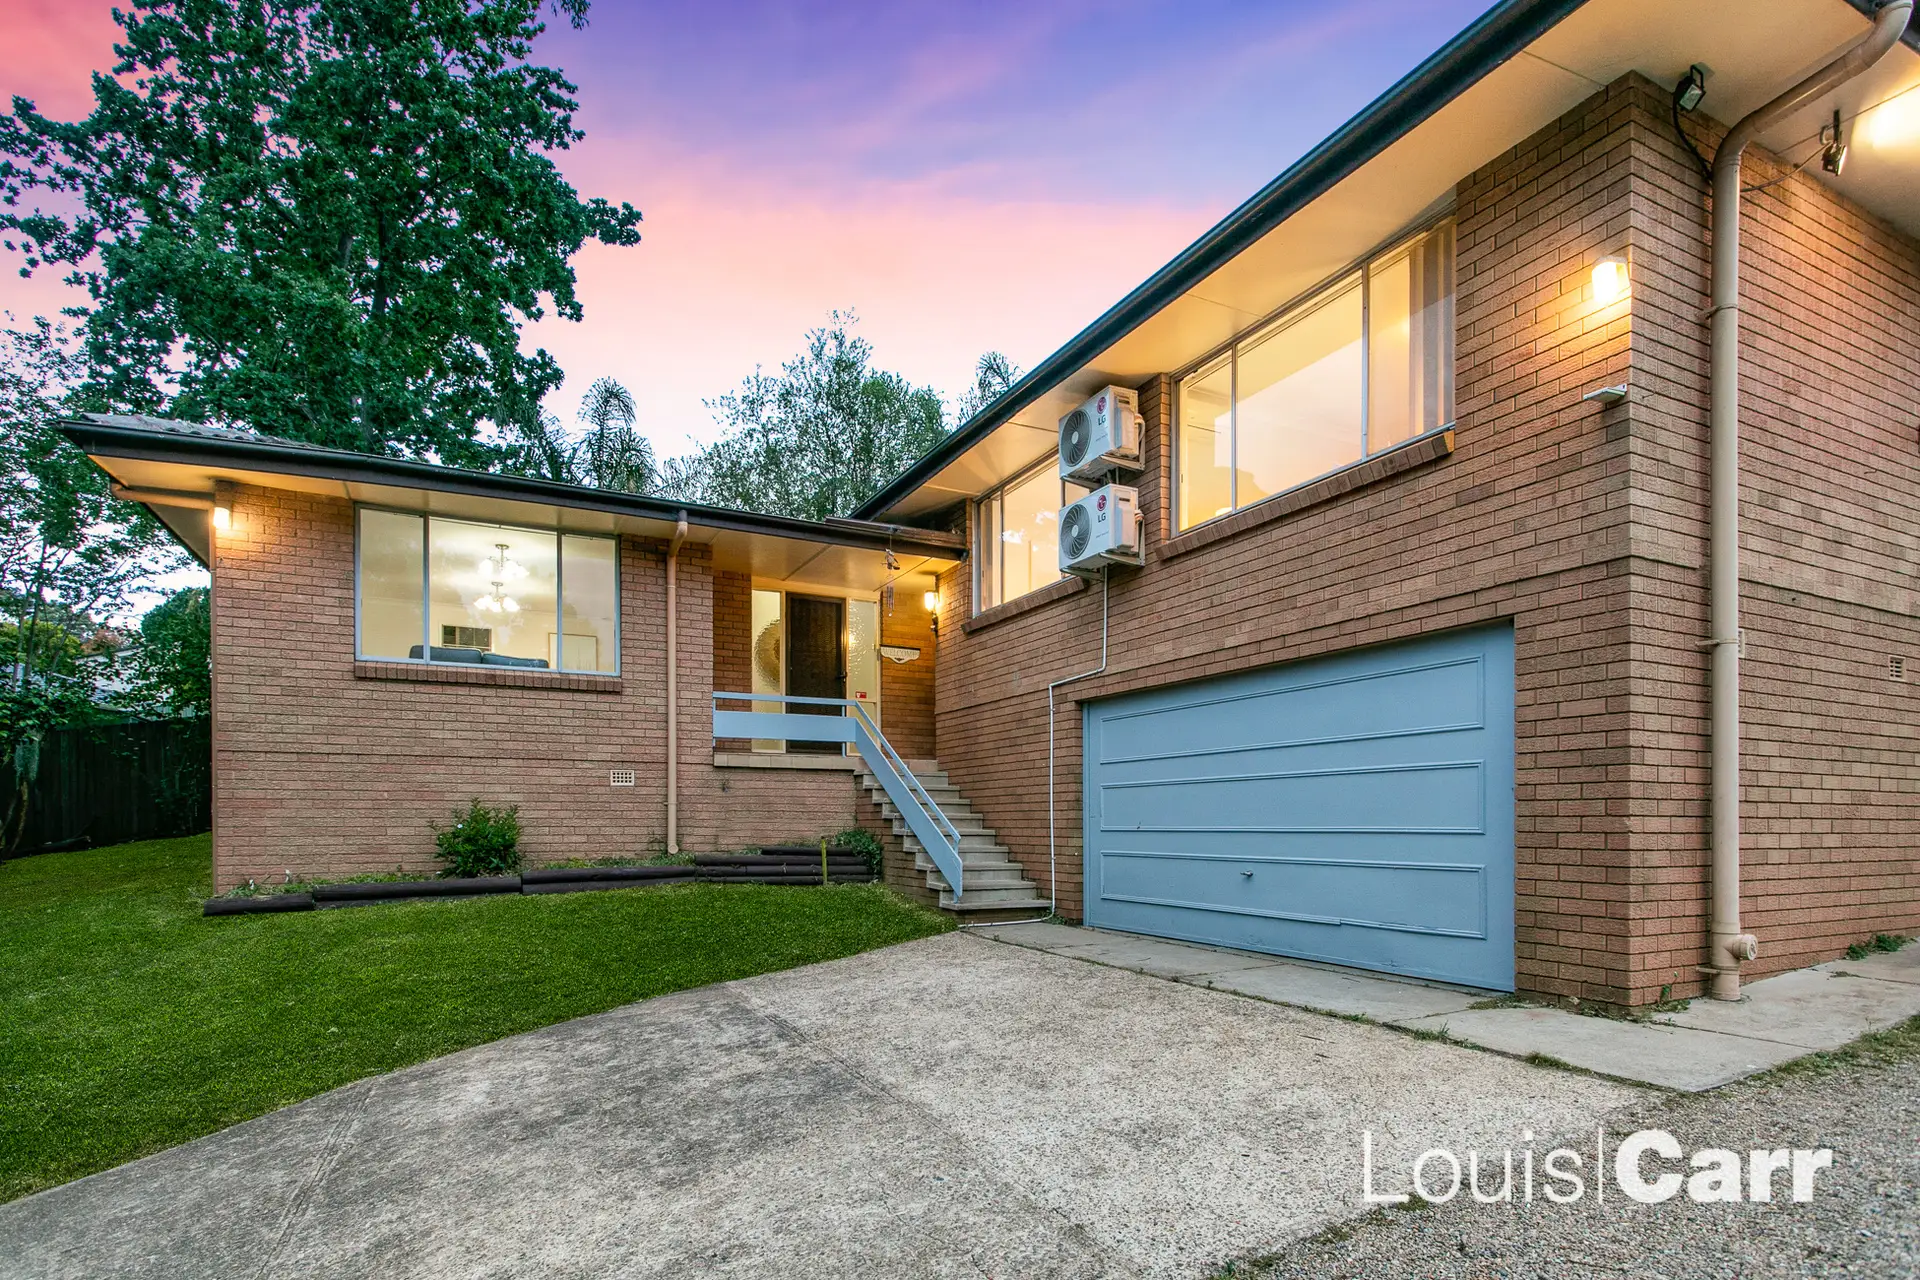 Photo #1: 10A Ashley Avenue, West Pennant Hills - Sold by Louis Carr Real Estate